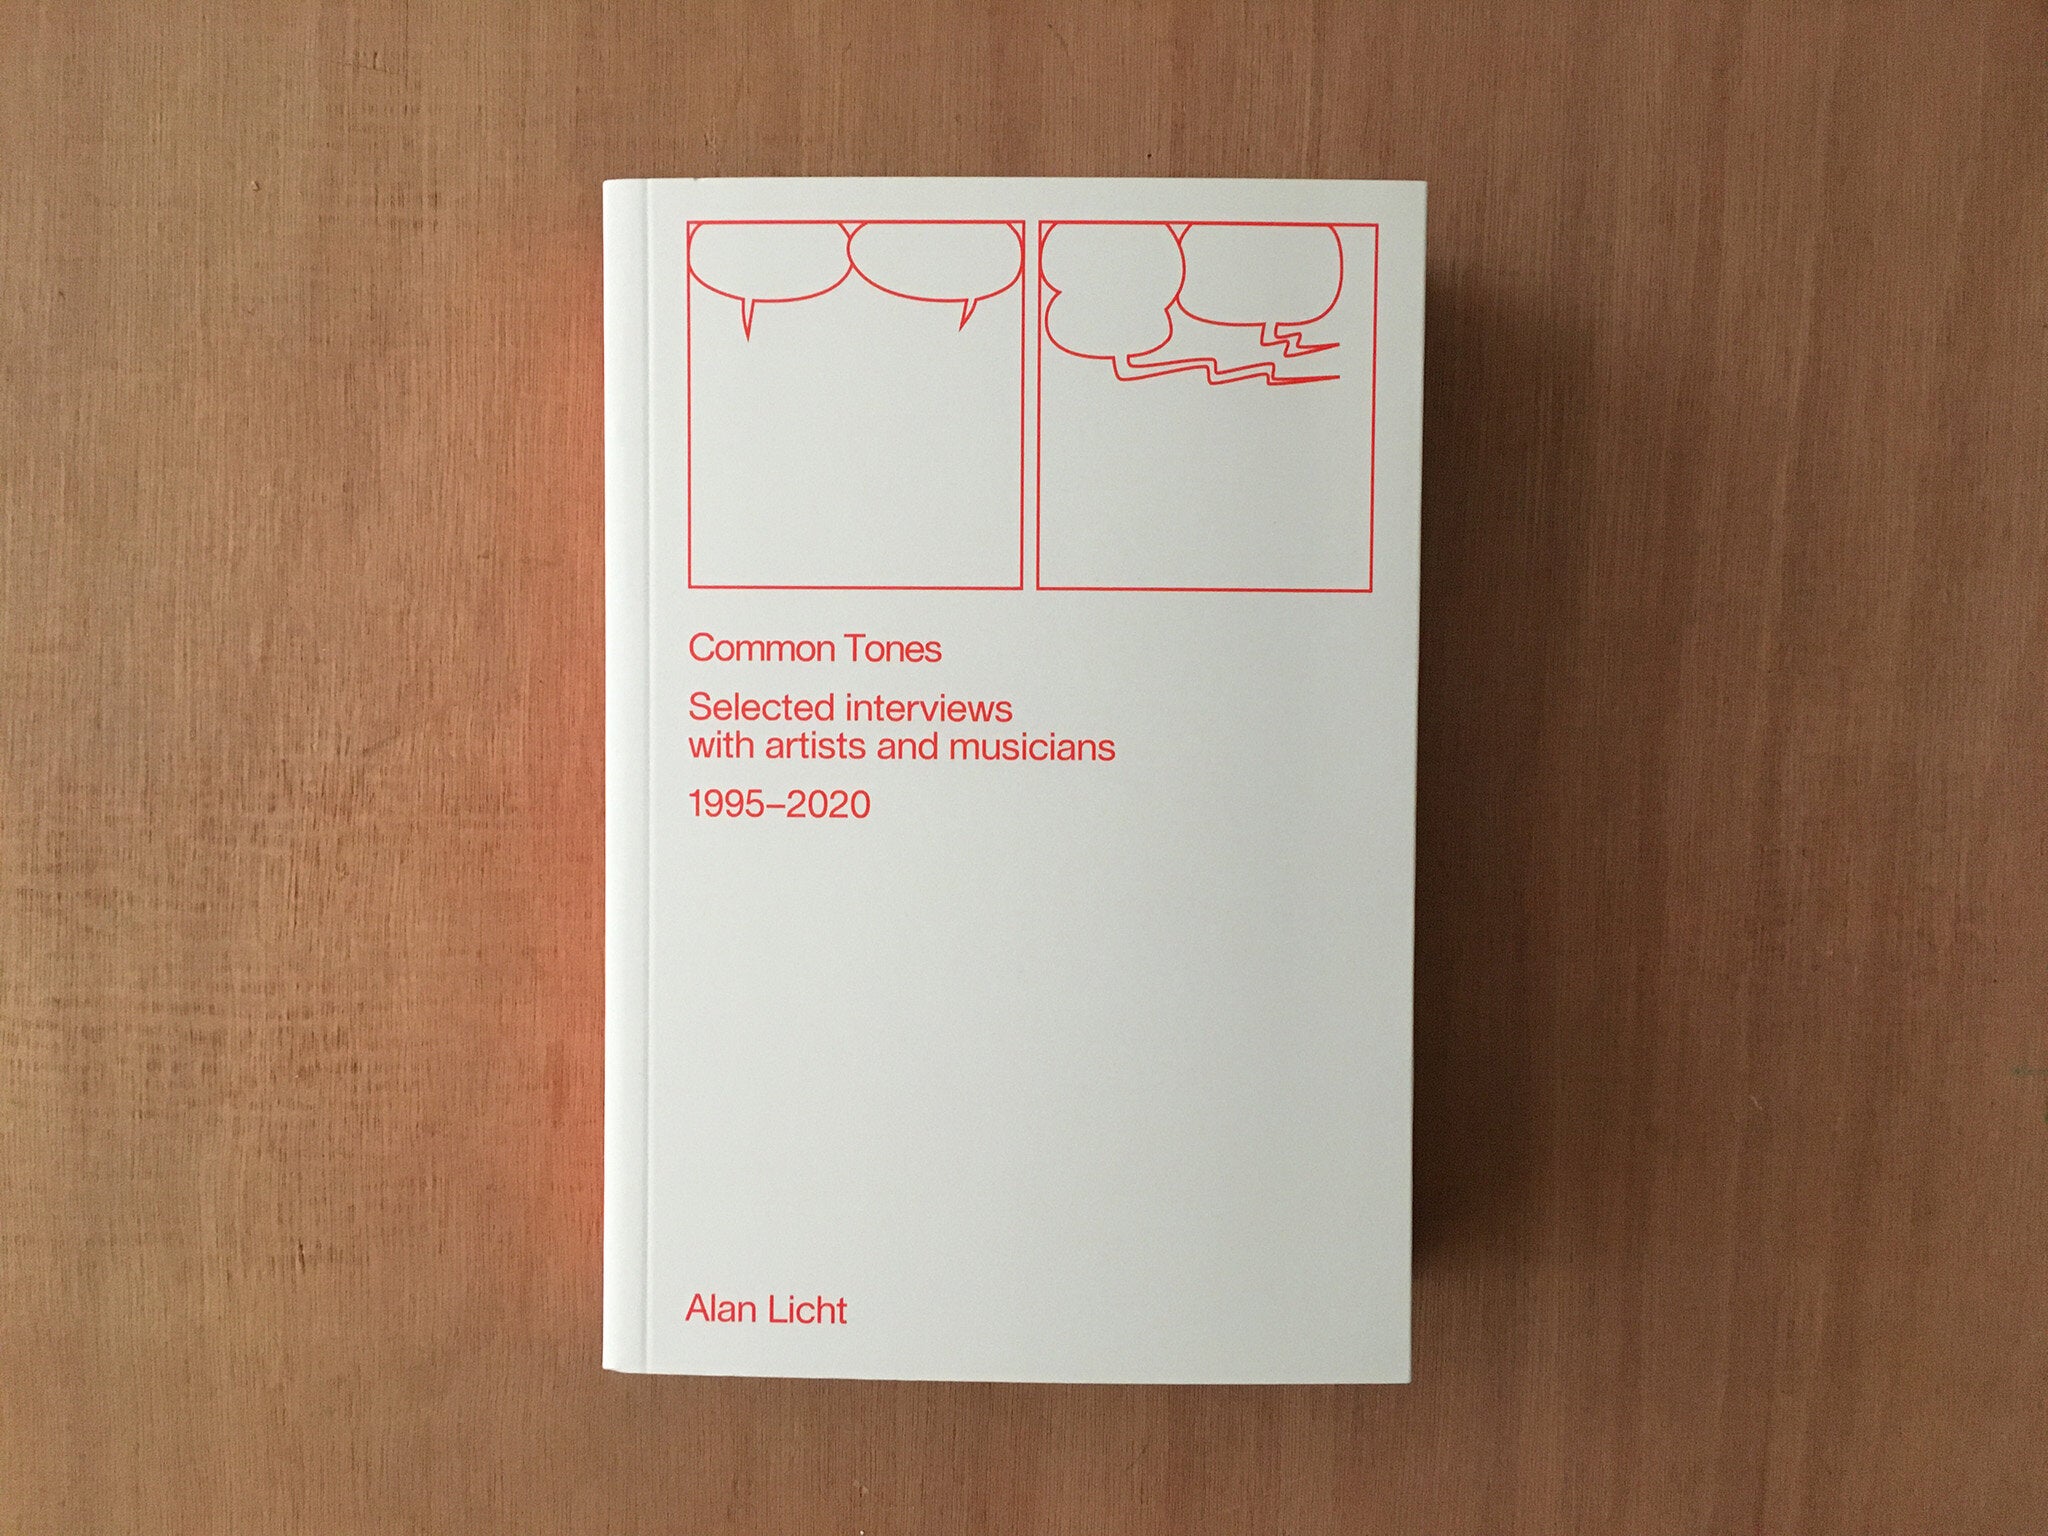 COMMON TONES: SELECTED INTERVIEWS WITH ARTISTS AND MUSICIANS 1995–2020 by Alan Licht